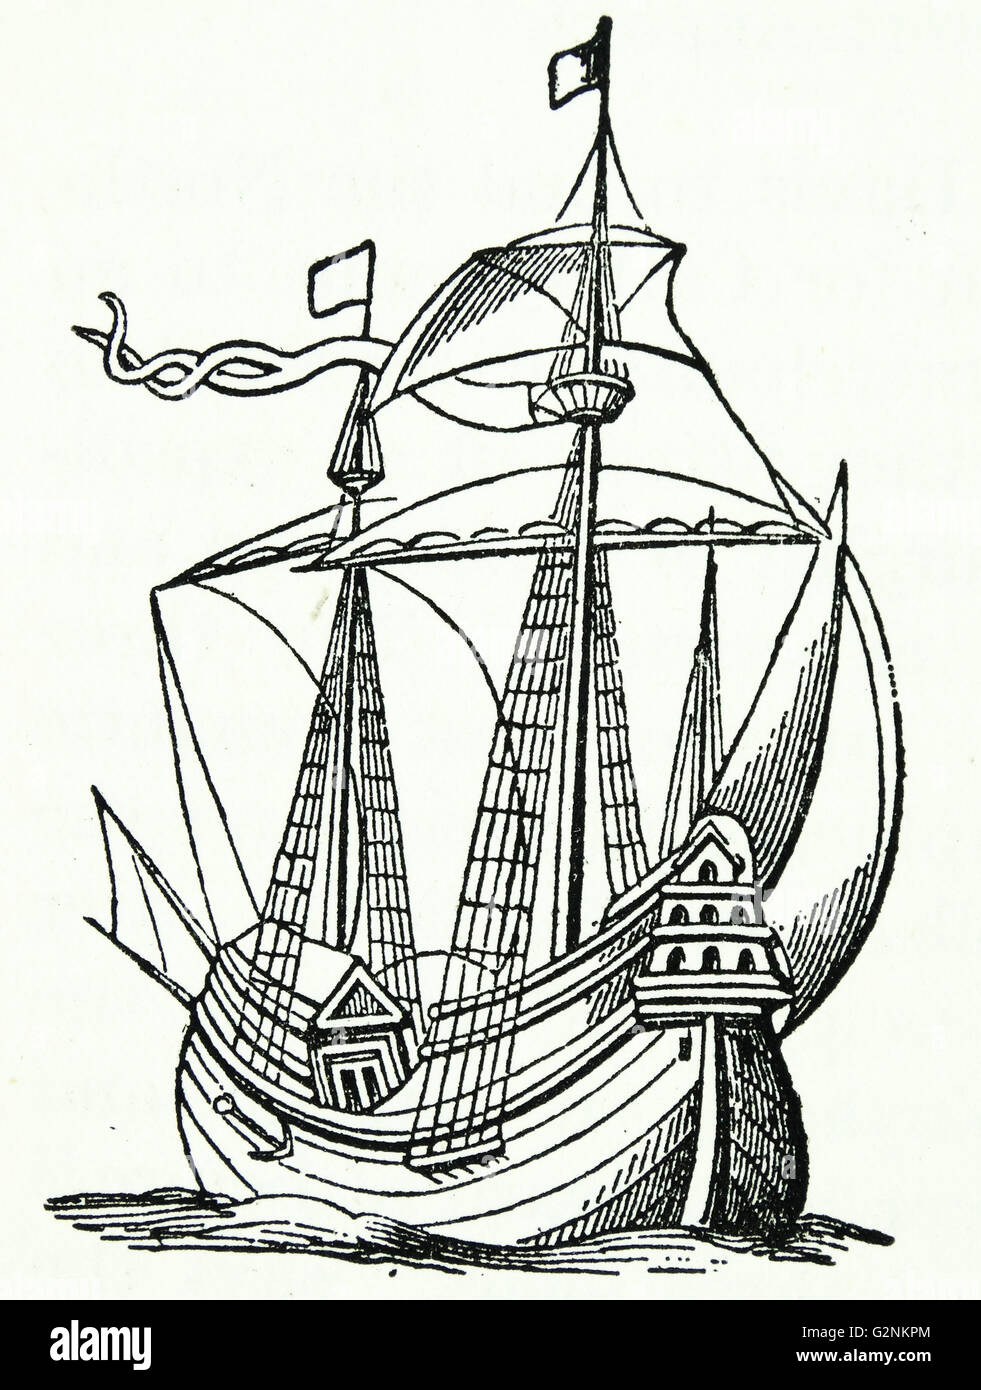 A ship of the late 16th century. From Ortelius 1598. Stock Photo